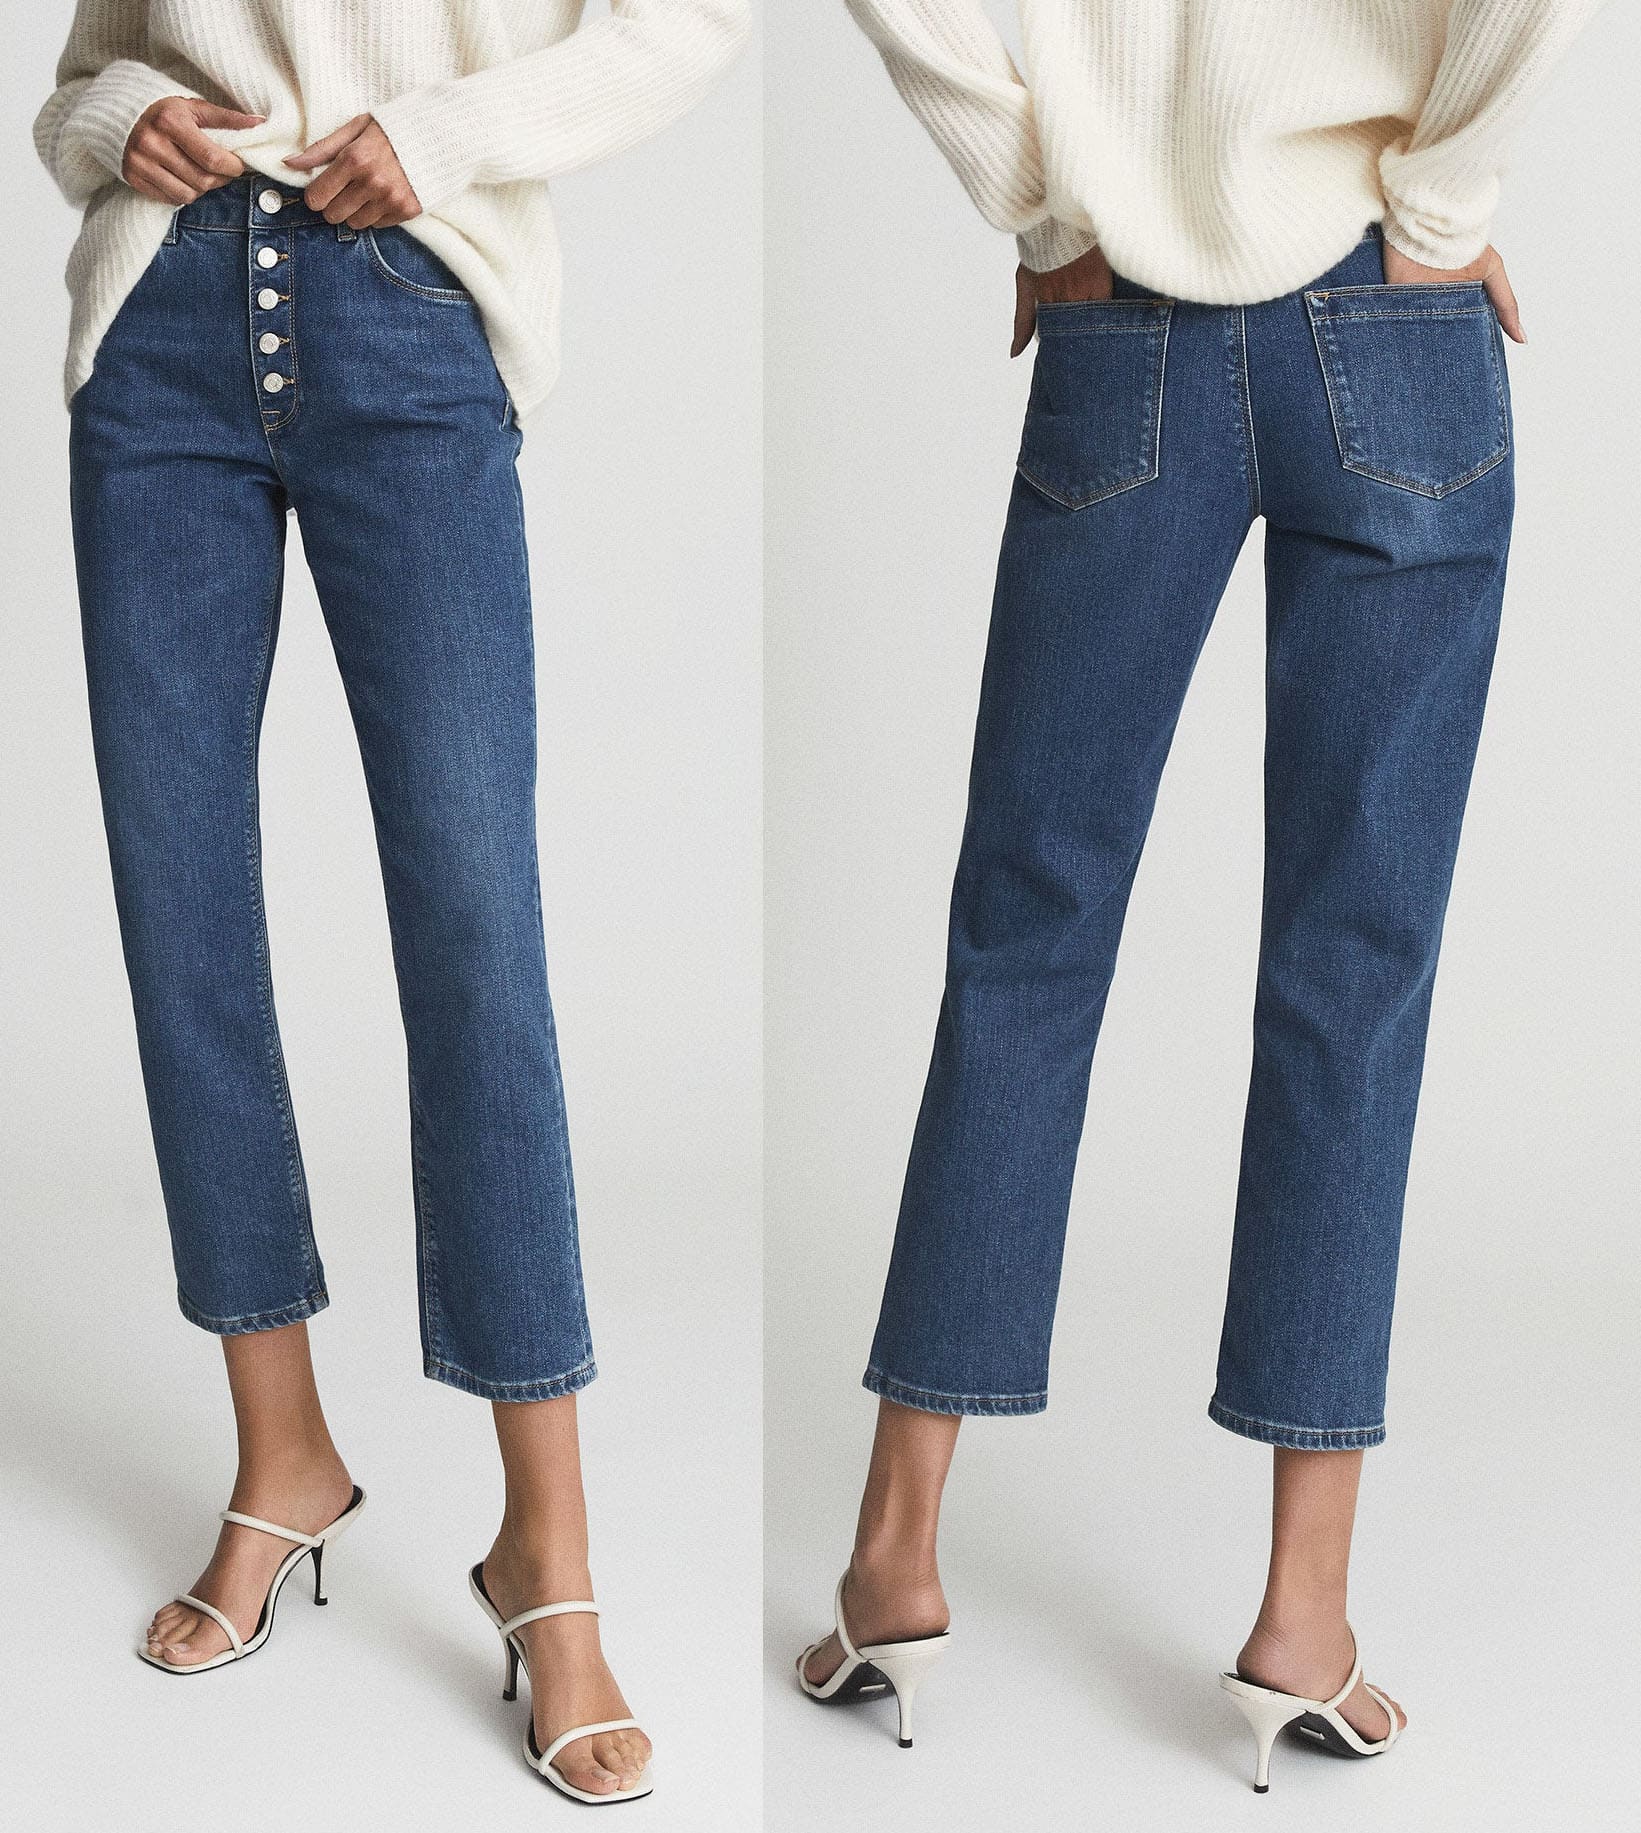 These mid-rise slim fit jeans are cropped right above the ankles and feature a unique finish to ensure the mid-blue color does not fade after washing